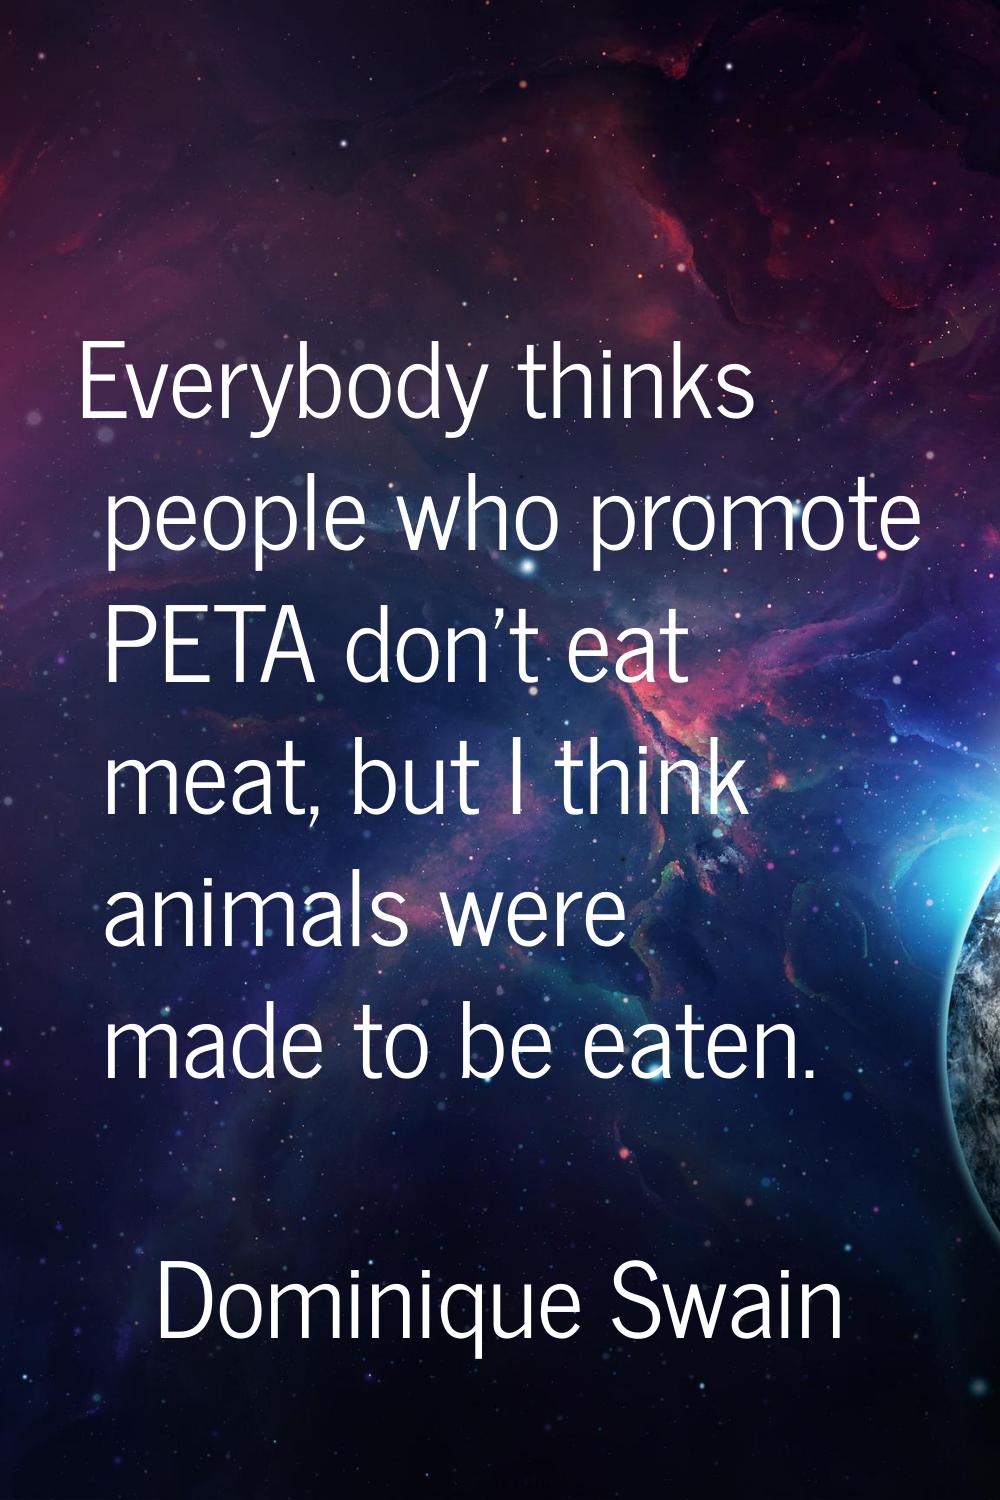 Everybody thinks people who promote PETA don't eat meat, but I think animals were made to be eaten.